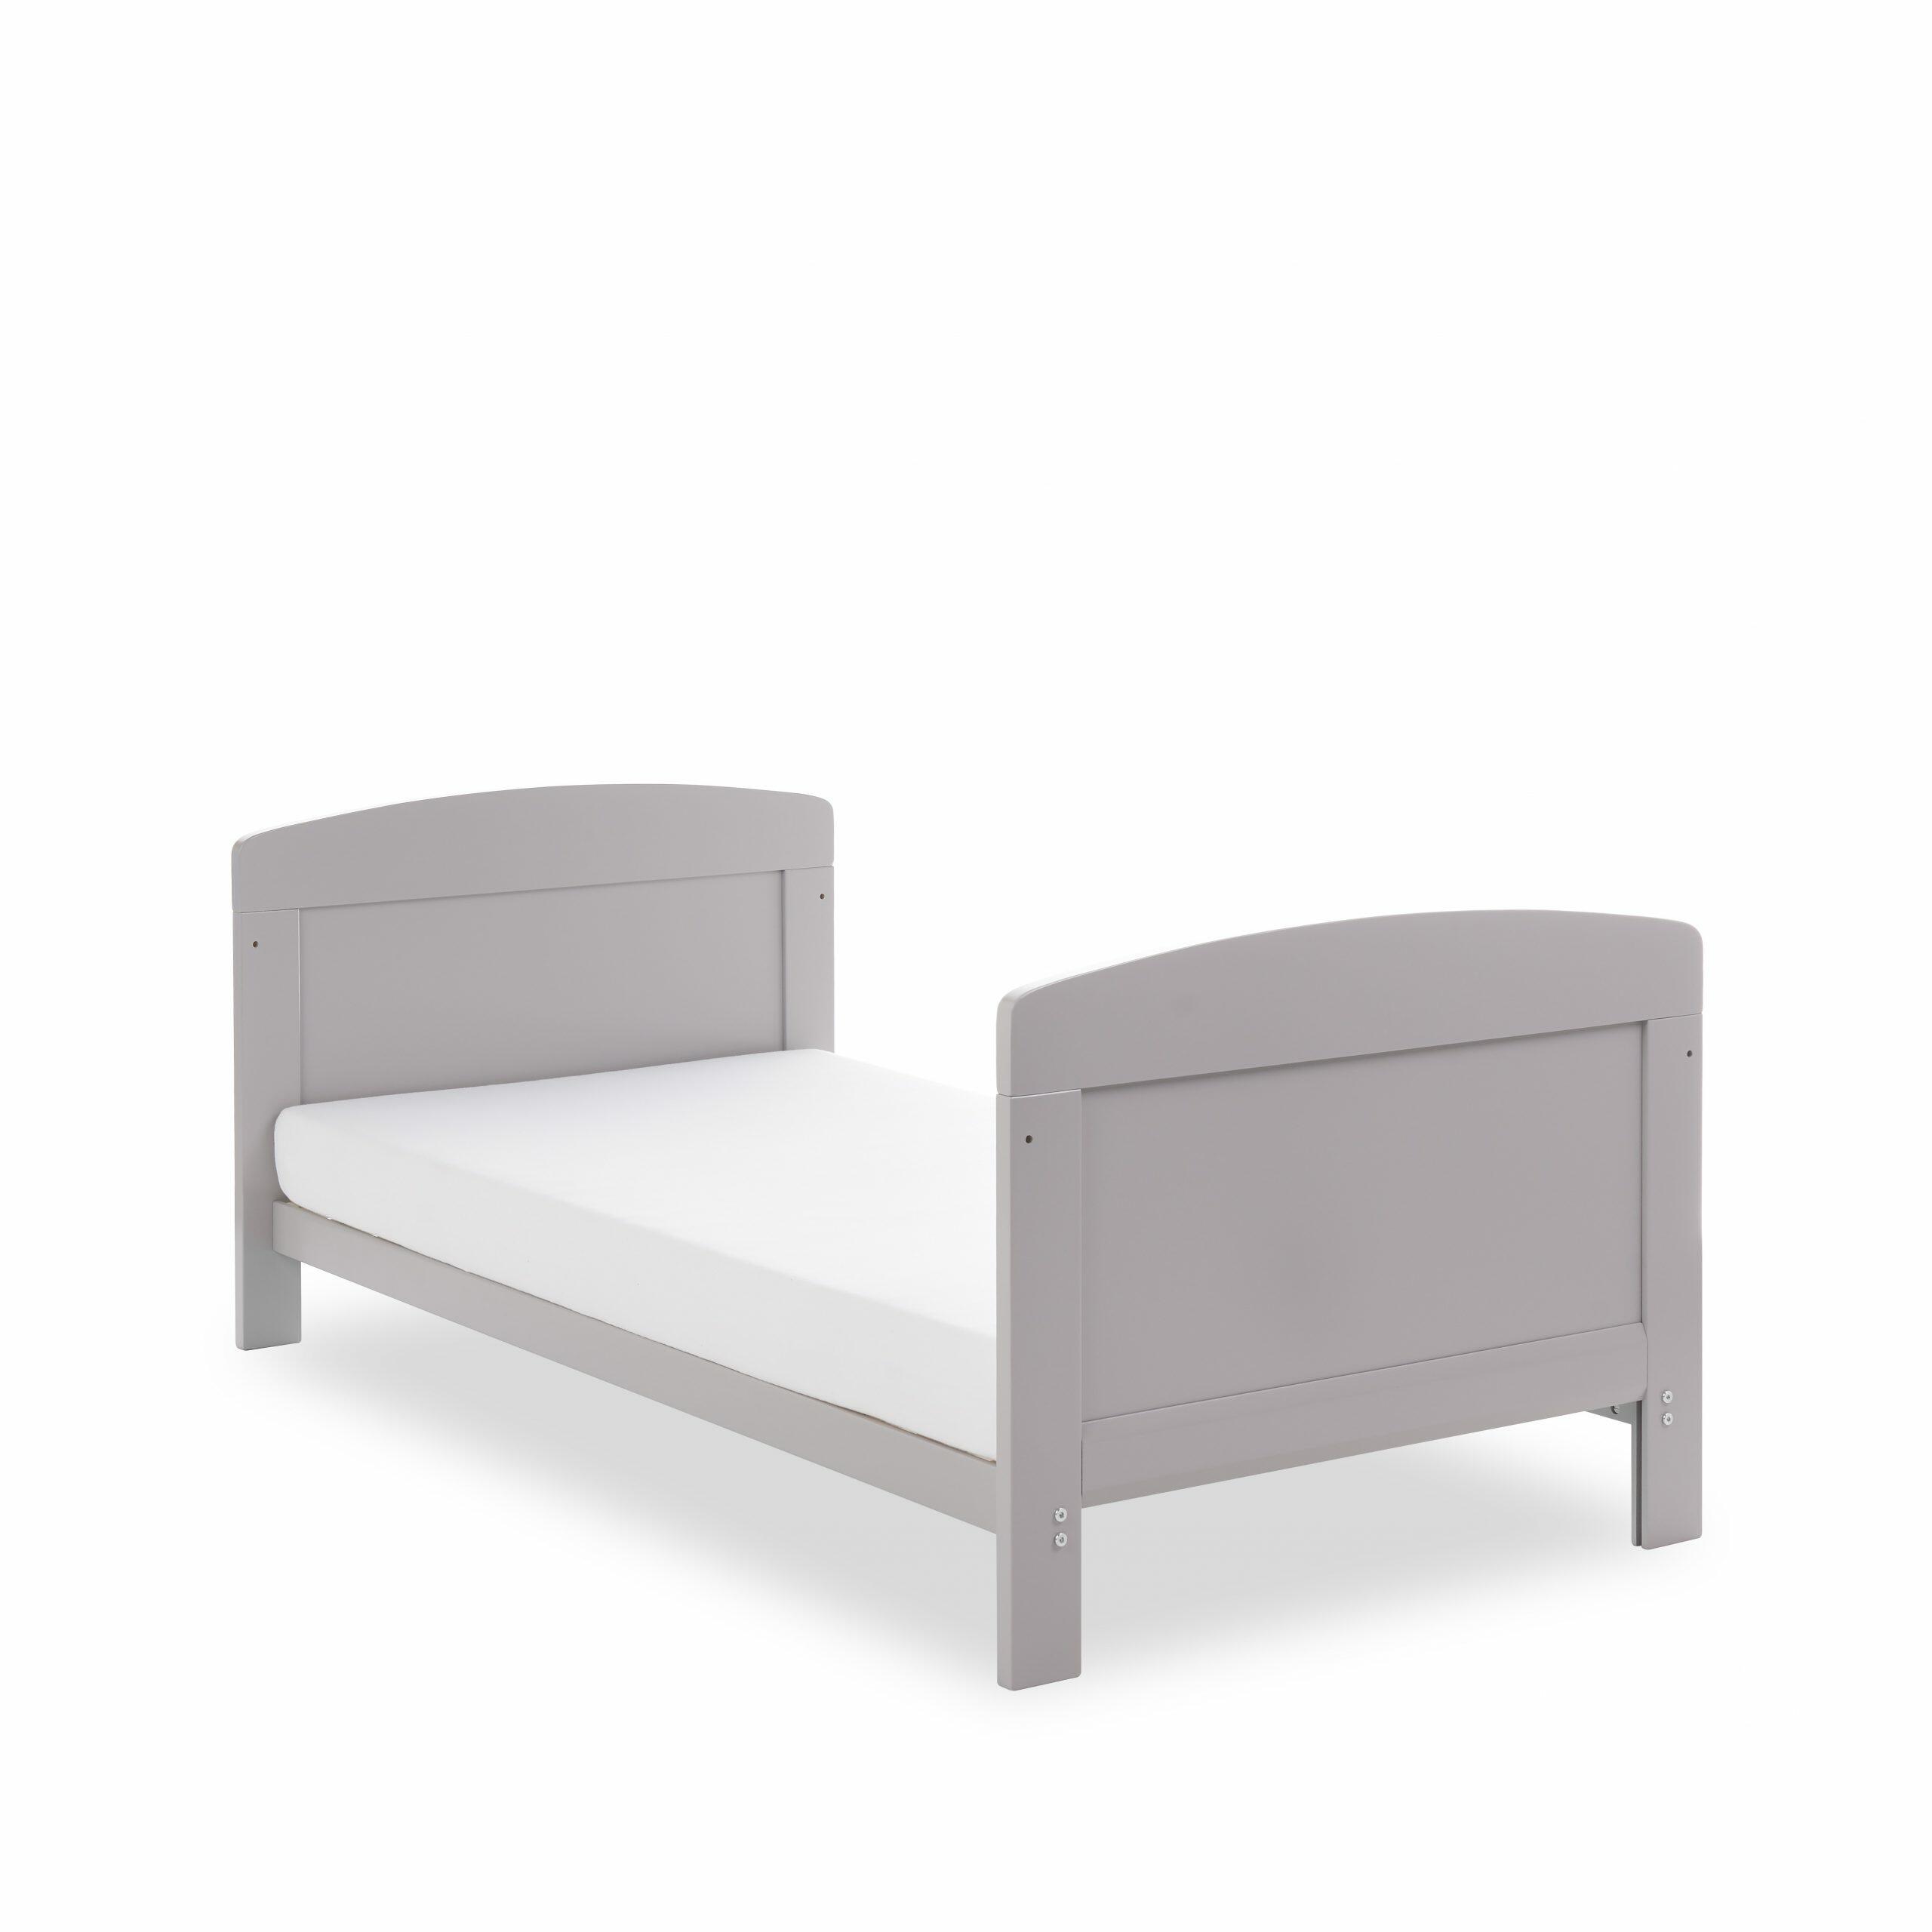 OBaby Grace Warm Grey Cot Bed toddler bed